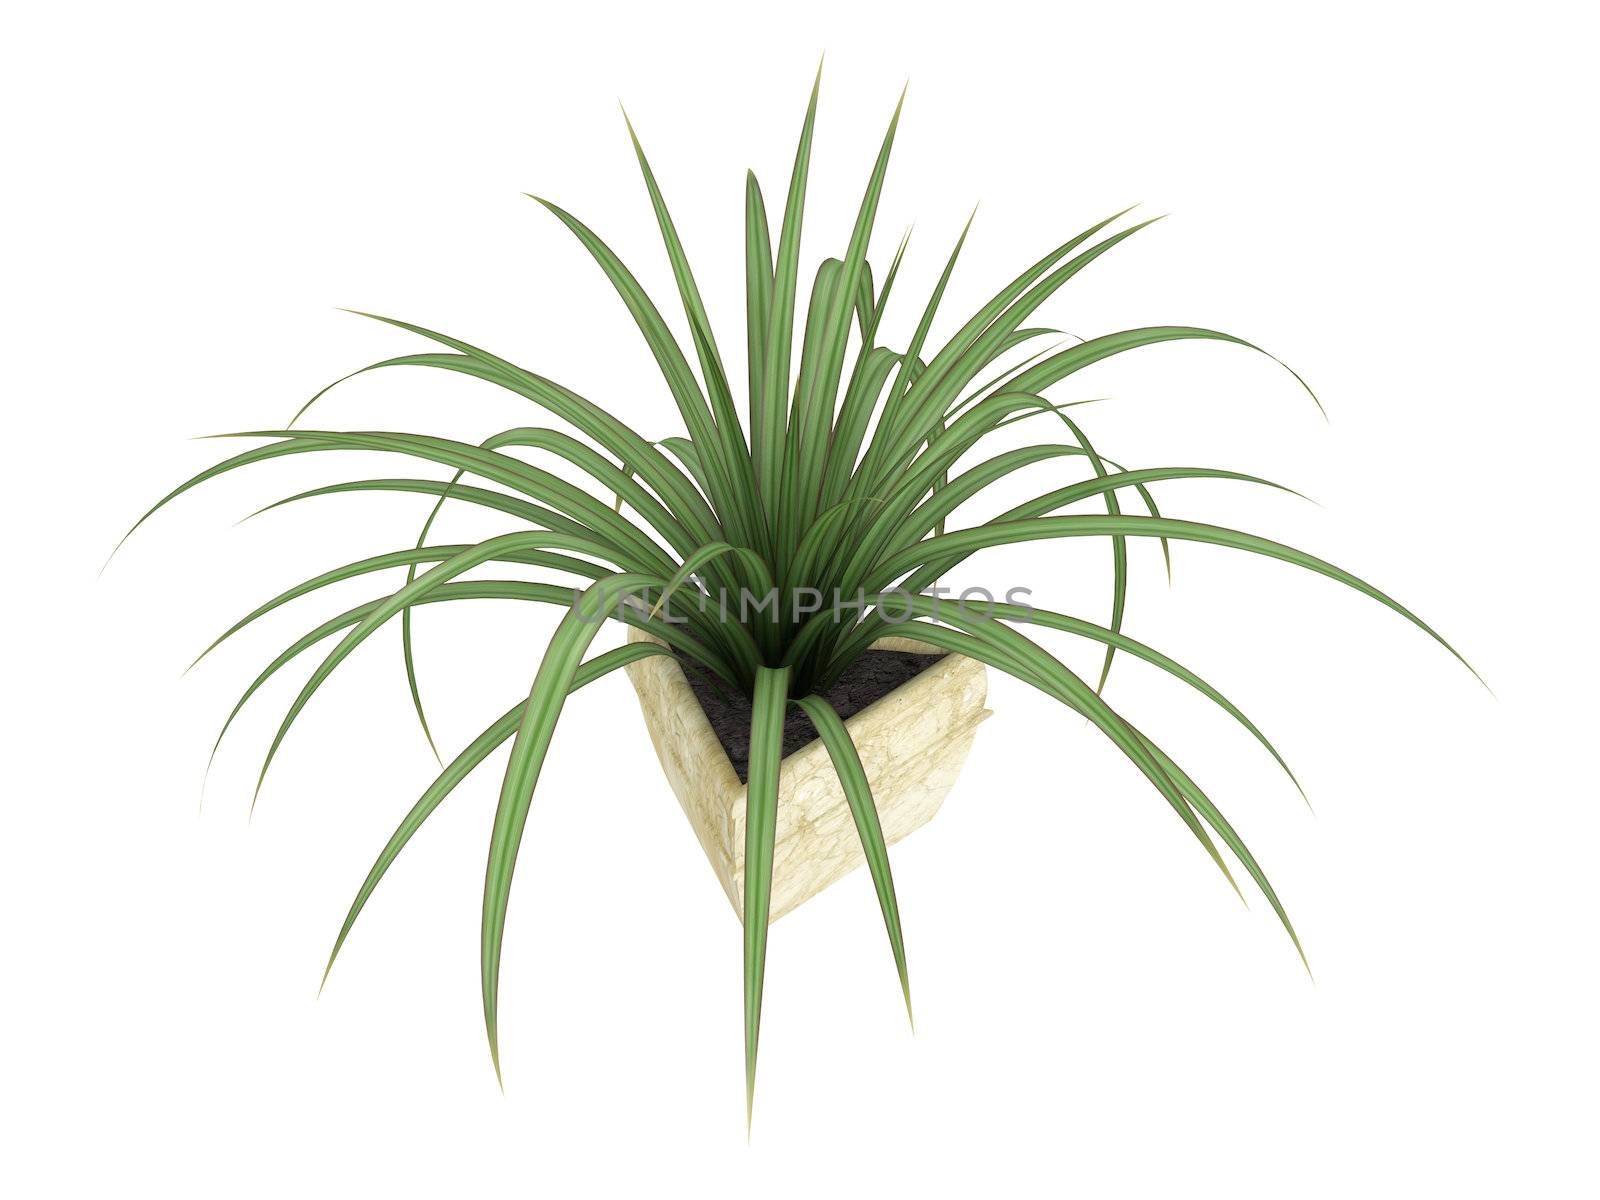 Small Pandanus plant, a monocot dioecious shrub with evergreen leaves, growing in a pot as an ornamental foliage houseplant isolated on white